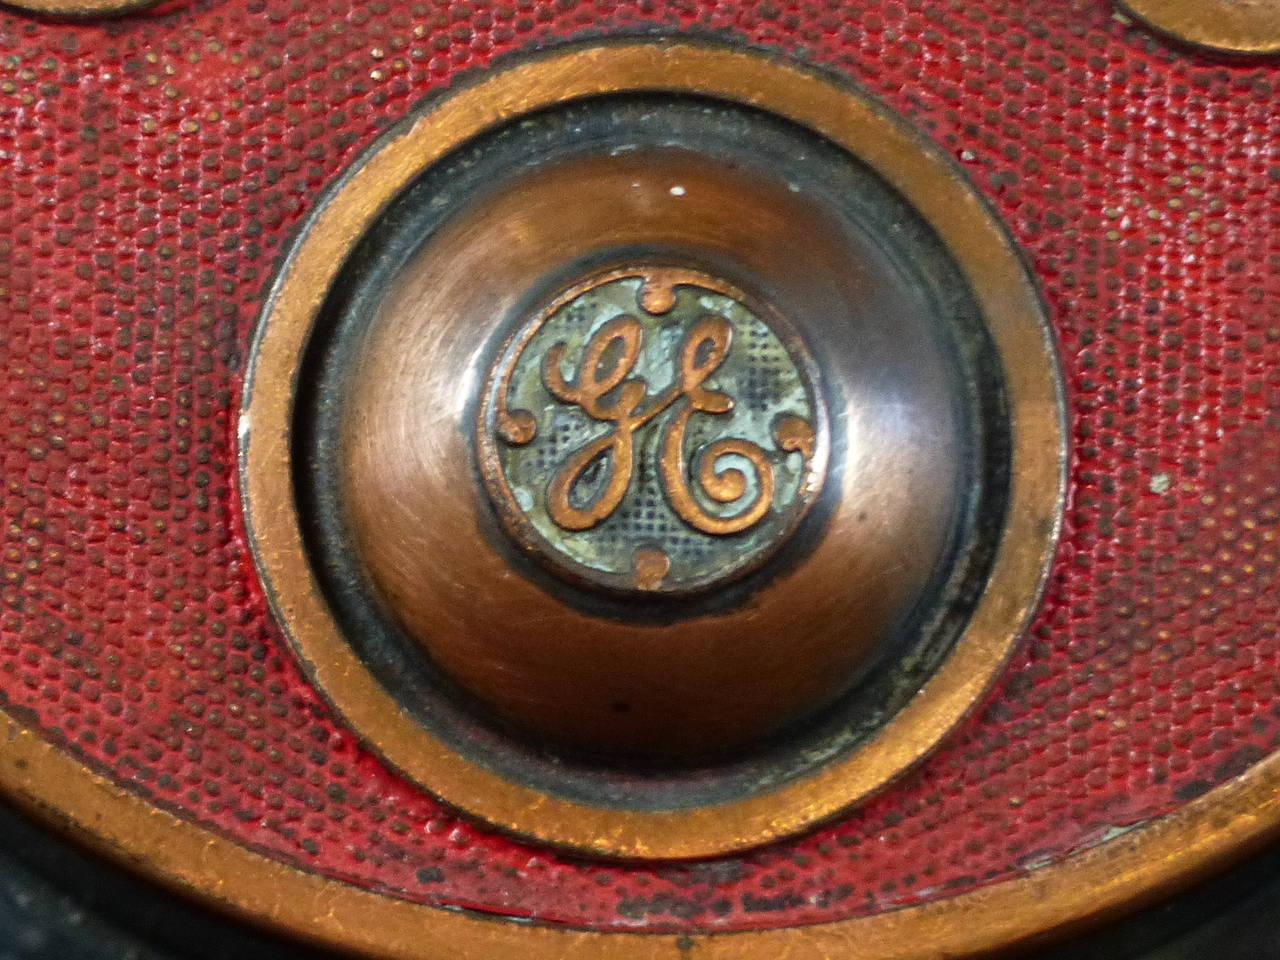 Interesting GE amp meter. Great detail and paint color